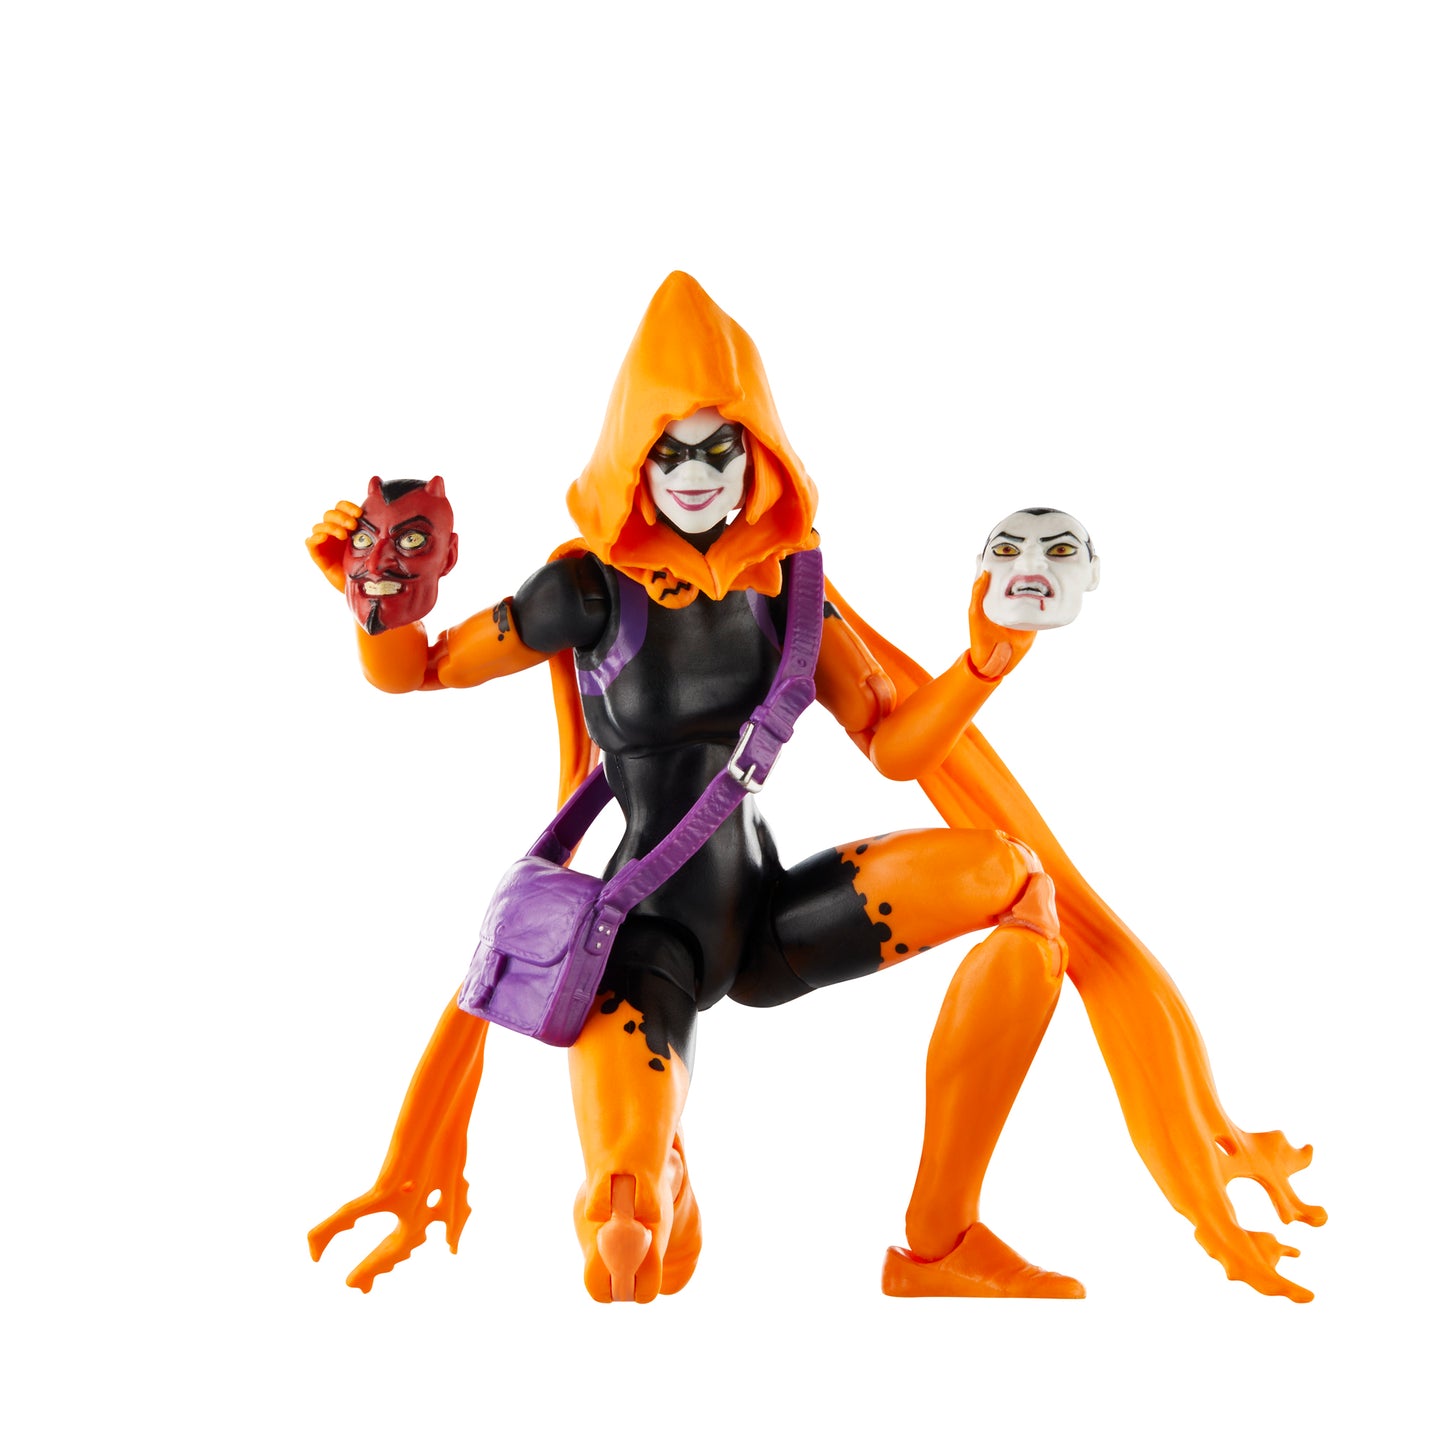 Marvel Legends Series Hallows' Eve, Spider-Man Comics Collectible 6-Inch Action Figure - HERETOSERVEYOU